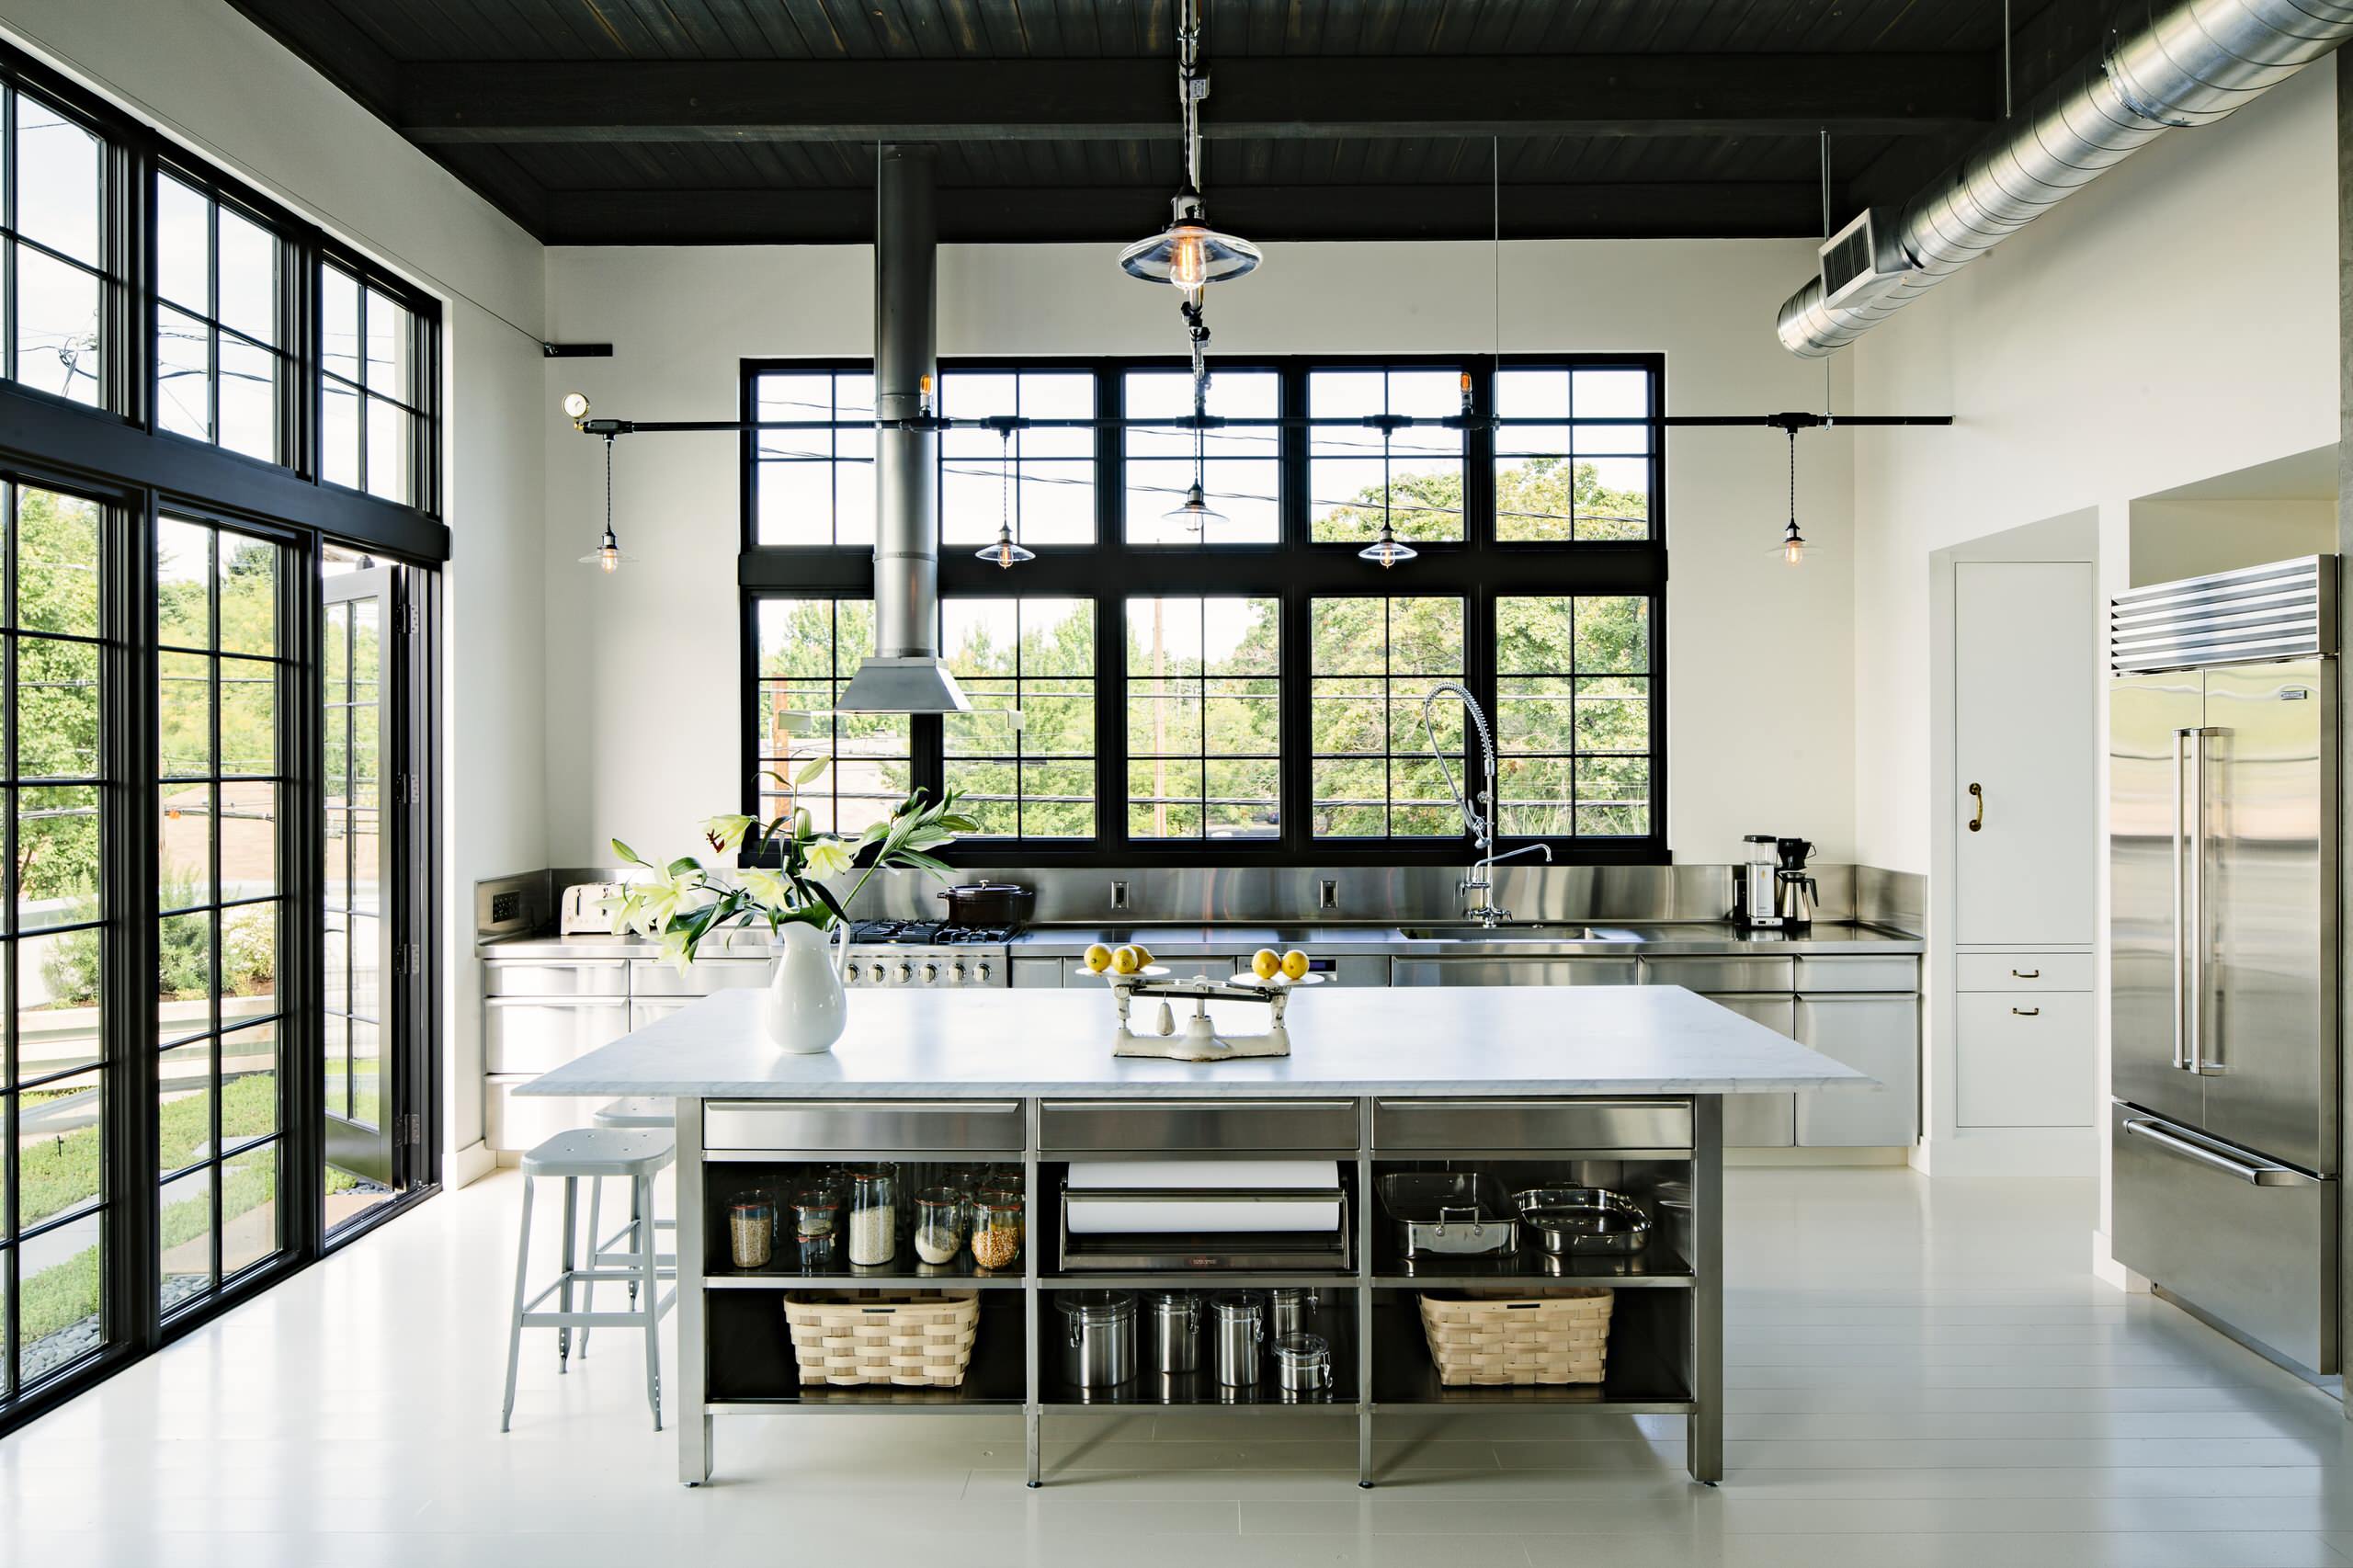 https://st.hzcdn.com/simgs/pictures/kitchens/division-street-emerick-architects-img~b53121a202619796_14-6062-1-5d8ad89.jpg